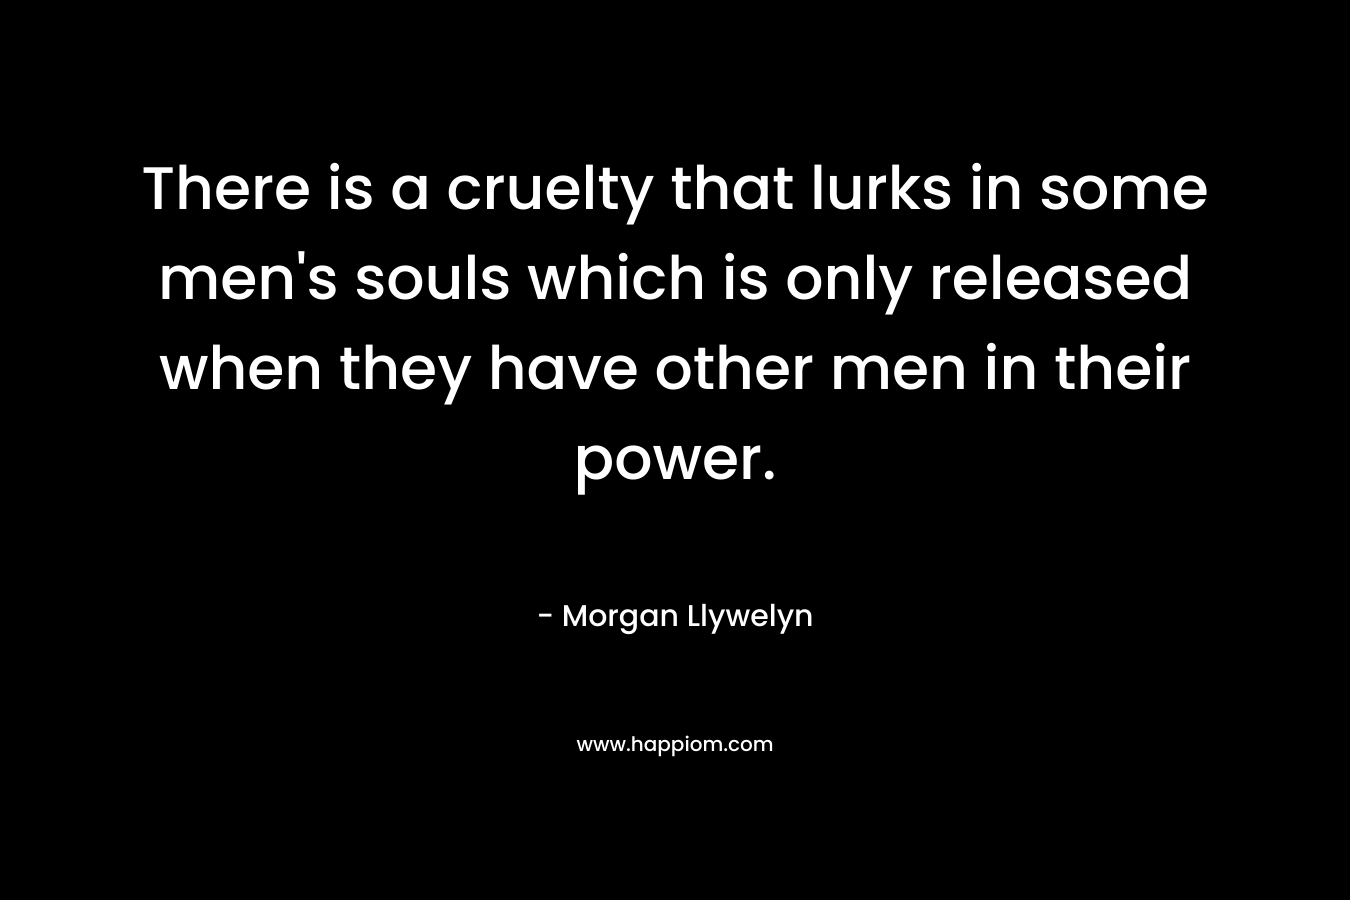 There is a cruelty that lurks in some men’s souls which is only released when they have other men in their power. – Morgan Llywelyn